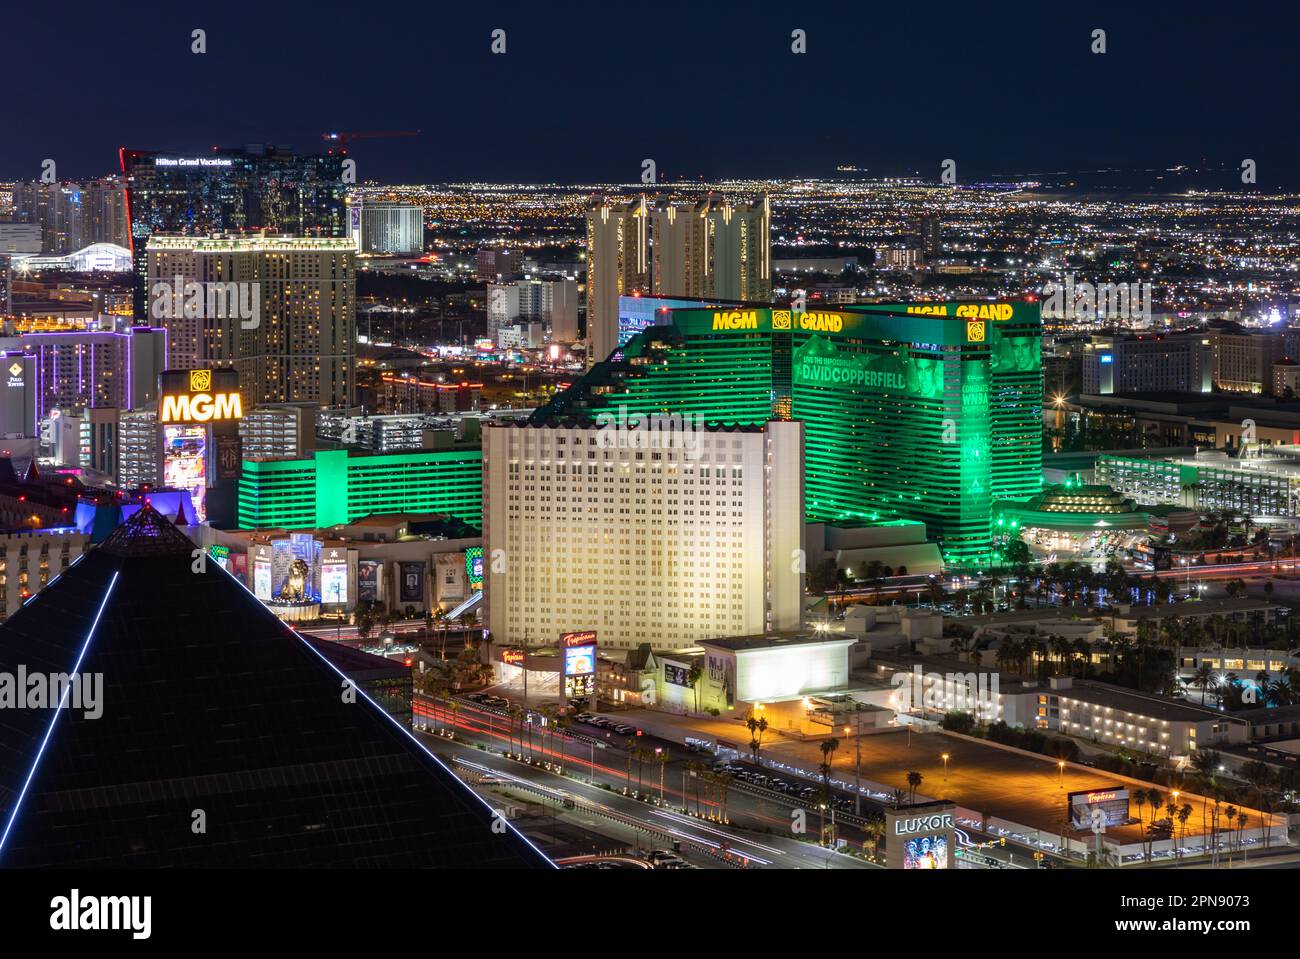 A picture of Las Vegas at night, showing the MGM Grand and the Tropicana Las Vegas - a DoubleTree by Hilton Hotel. Stock Photo